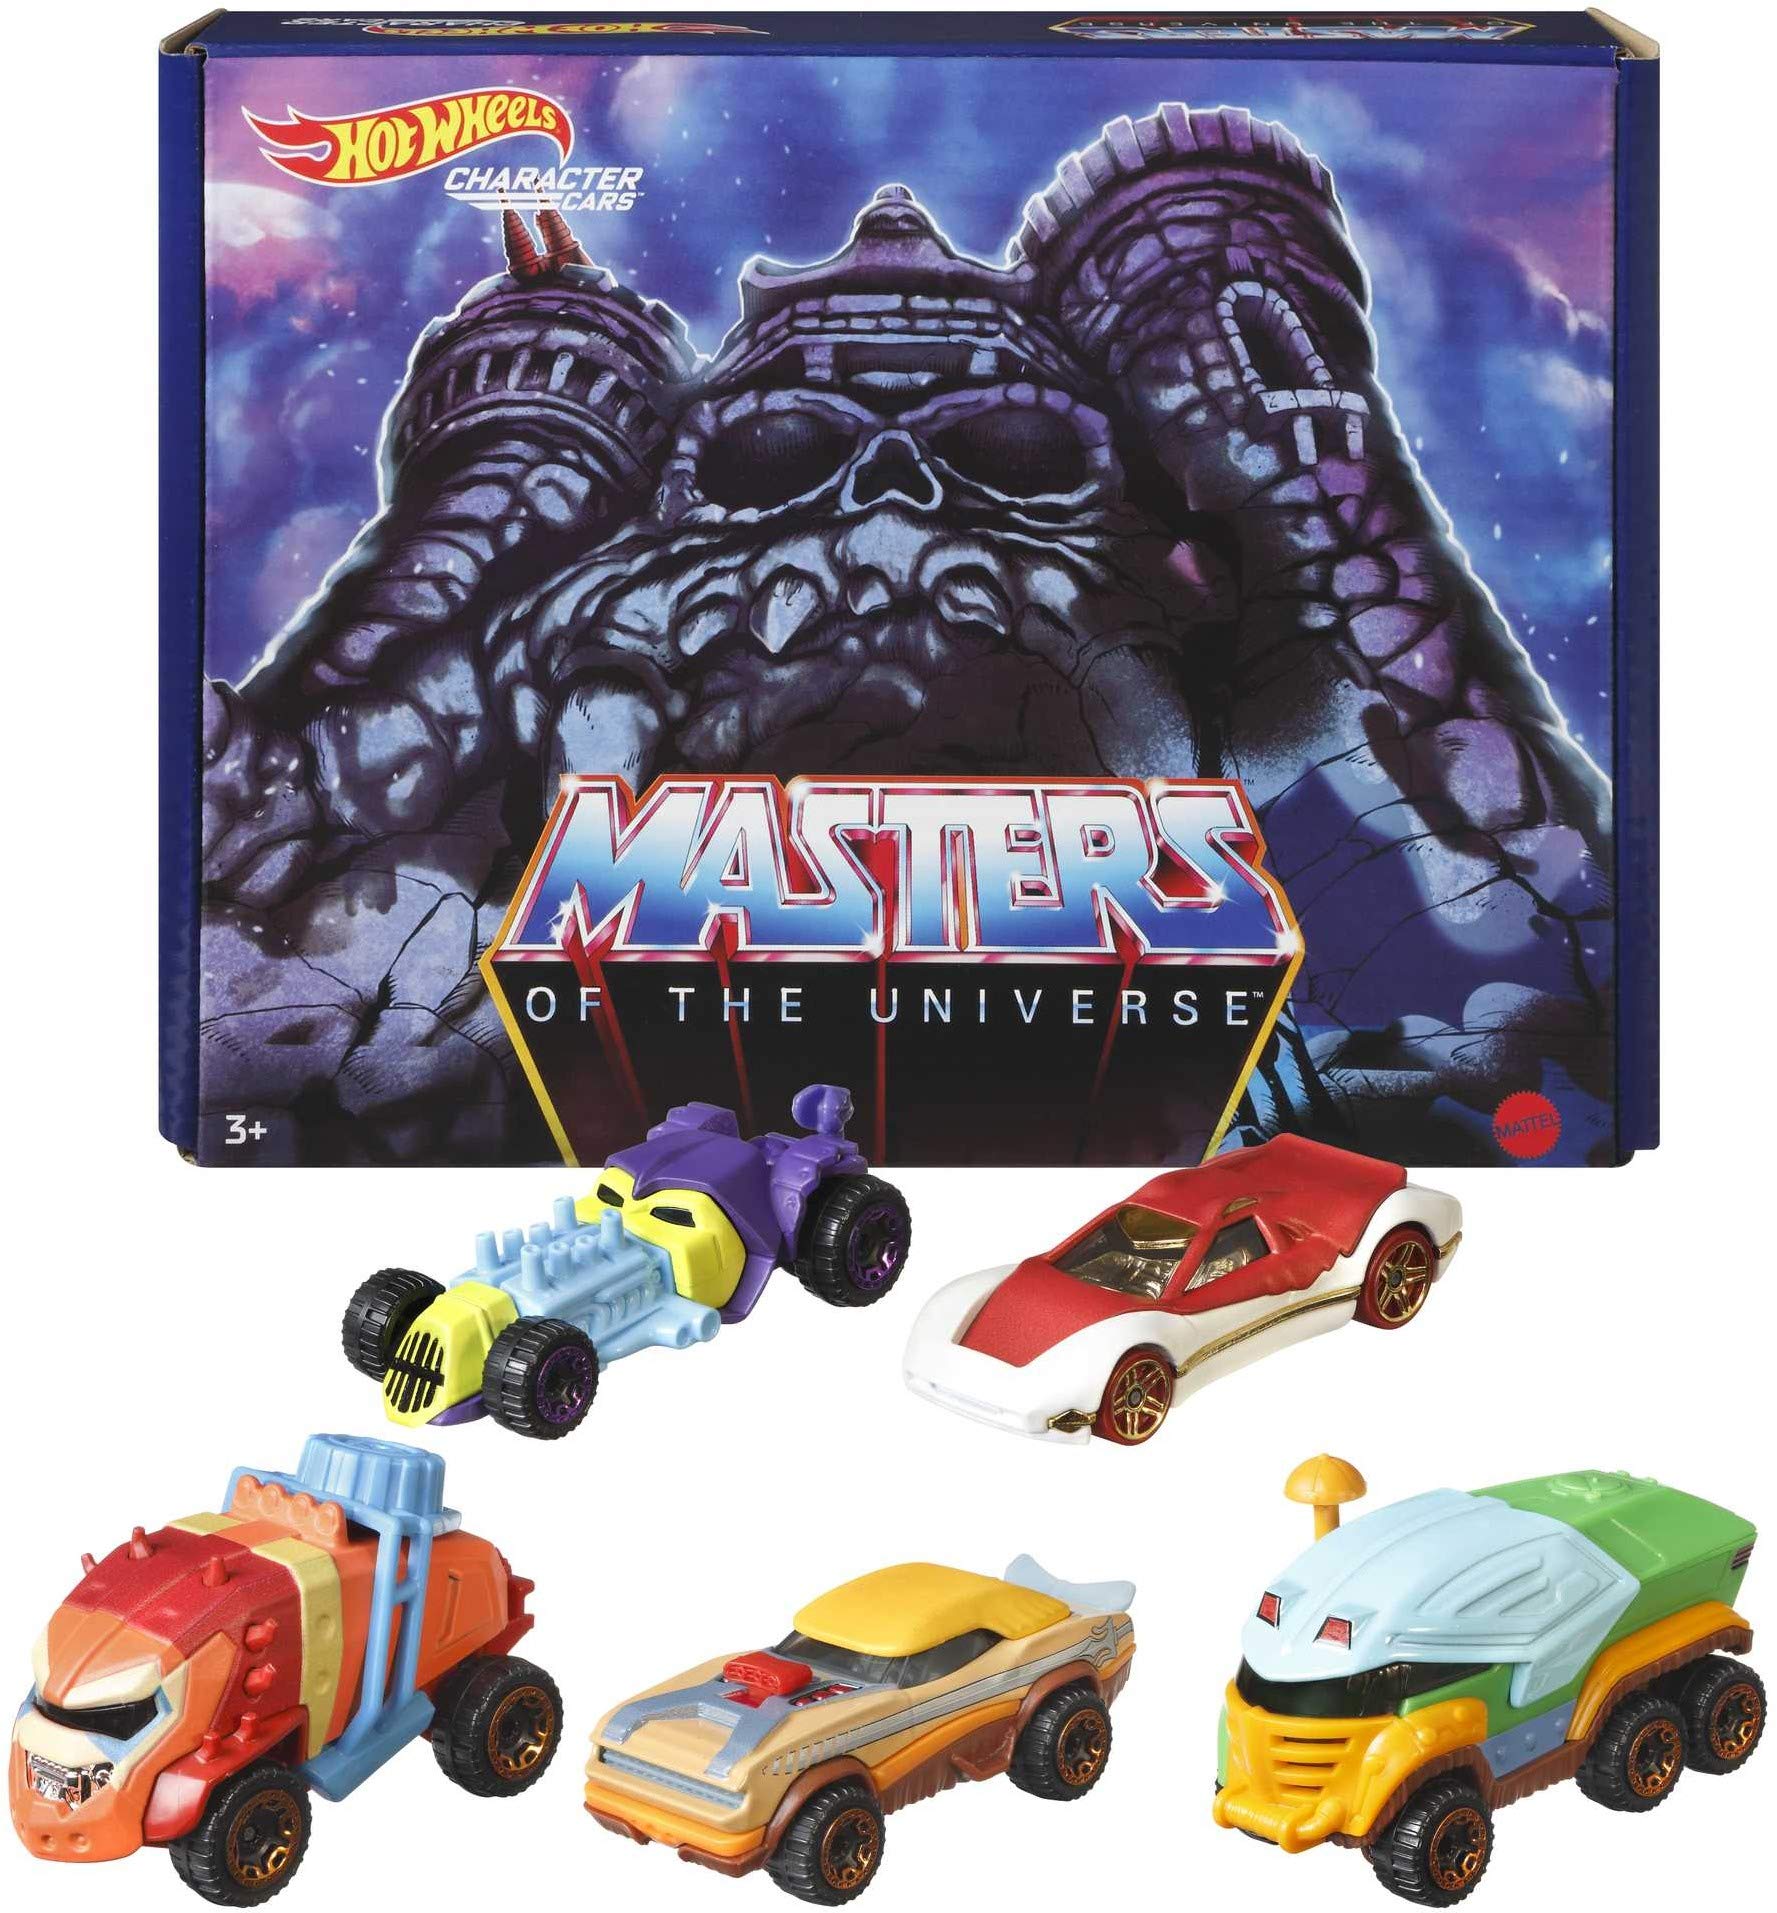 5-Count Hot Wheels Masters of the Universe Character Cars $6.78 + Free Shipping w/ Prime or on $35+